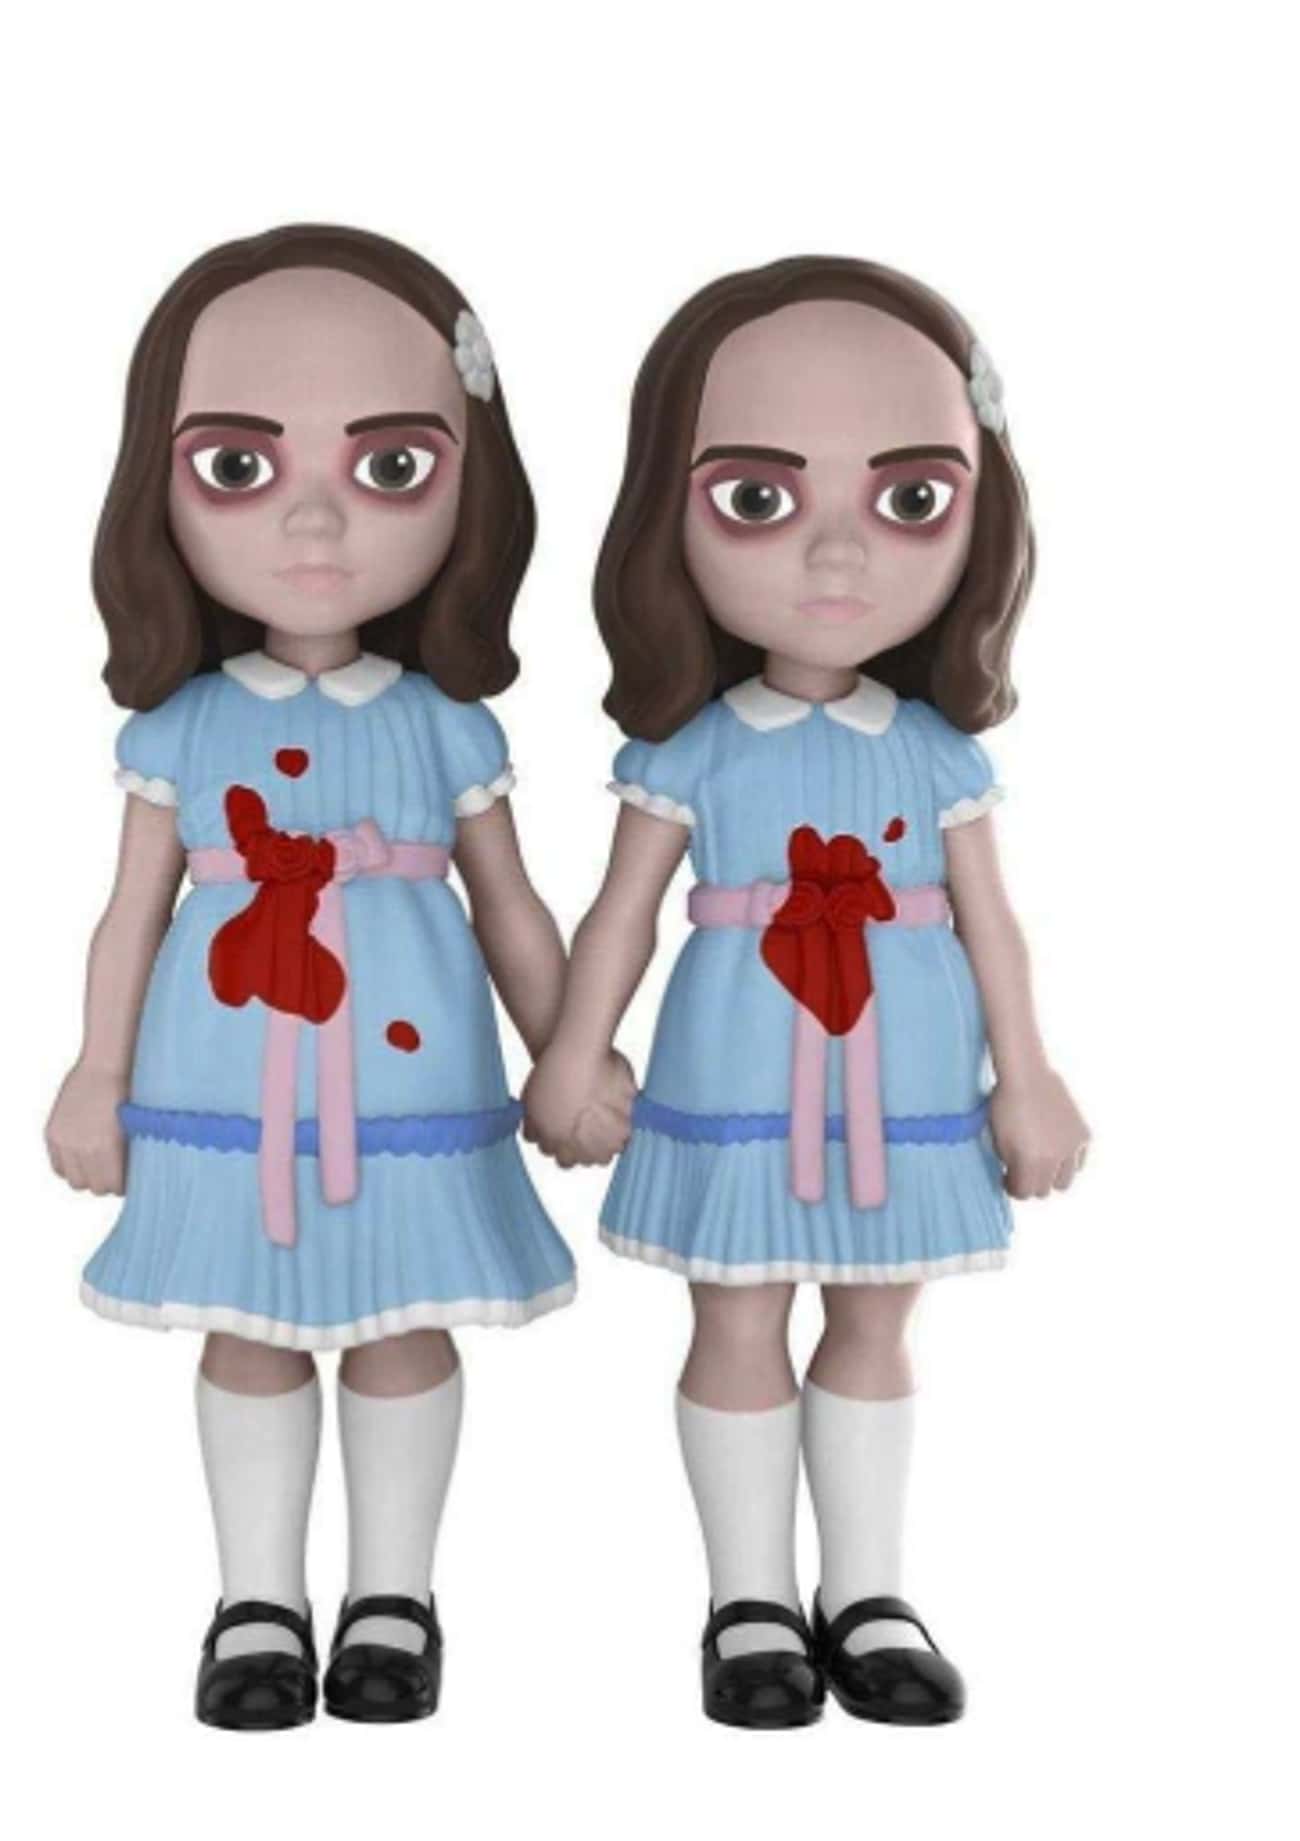 The Grady Sisters From 'The Shining'